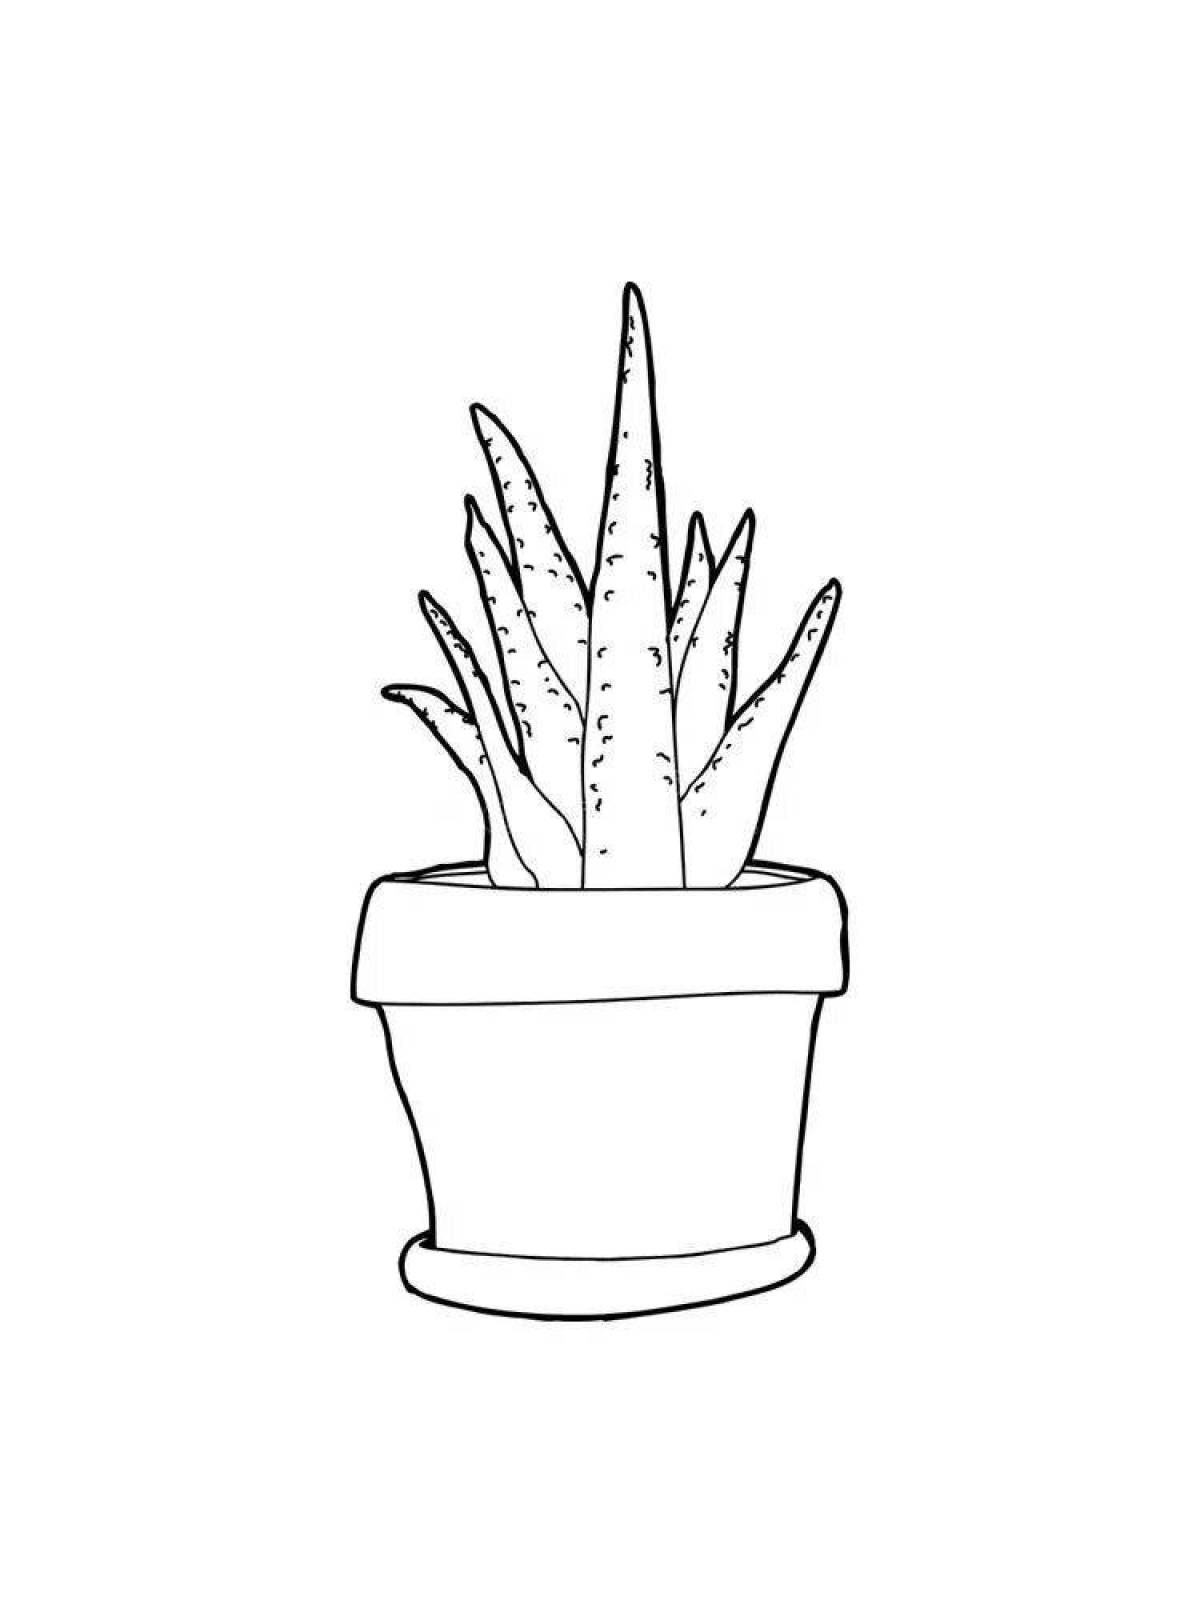 Amazing aloe coloring page